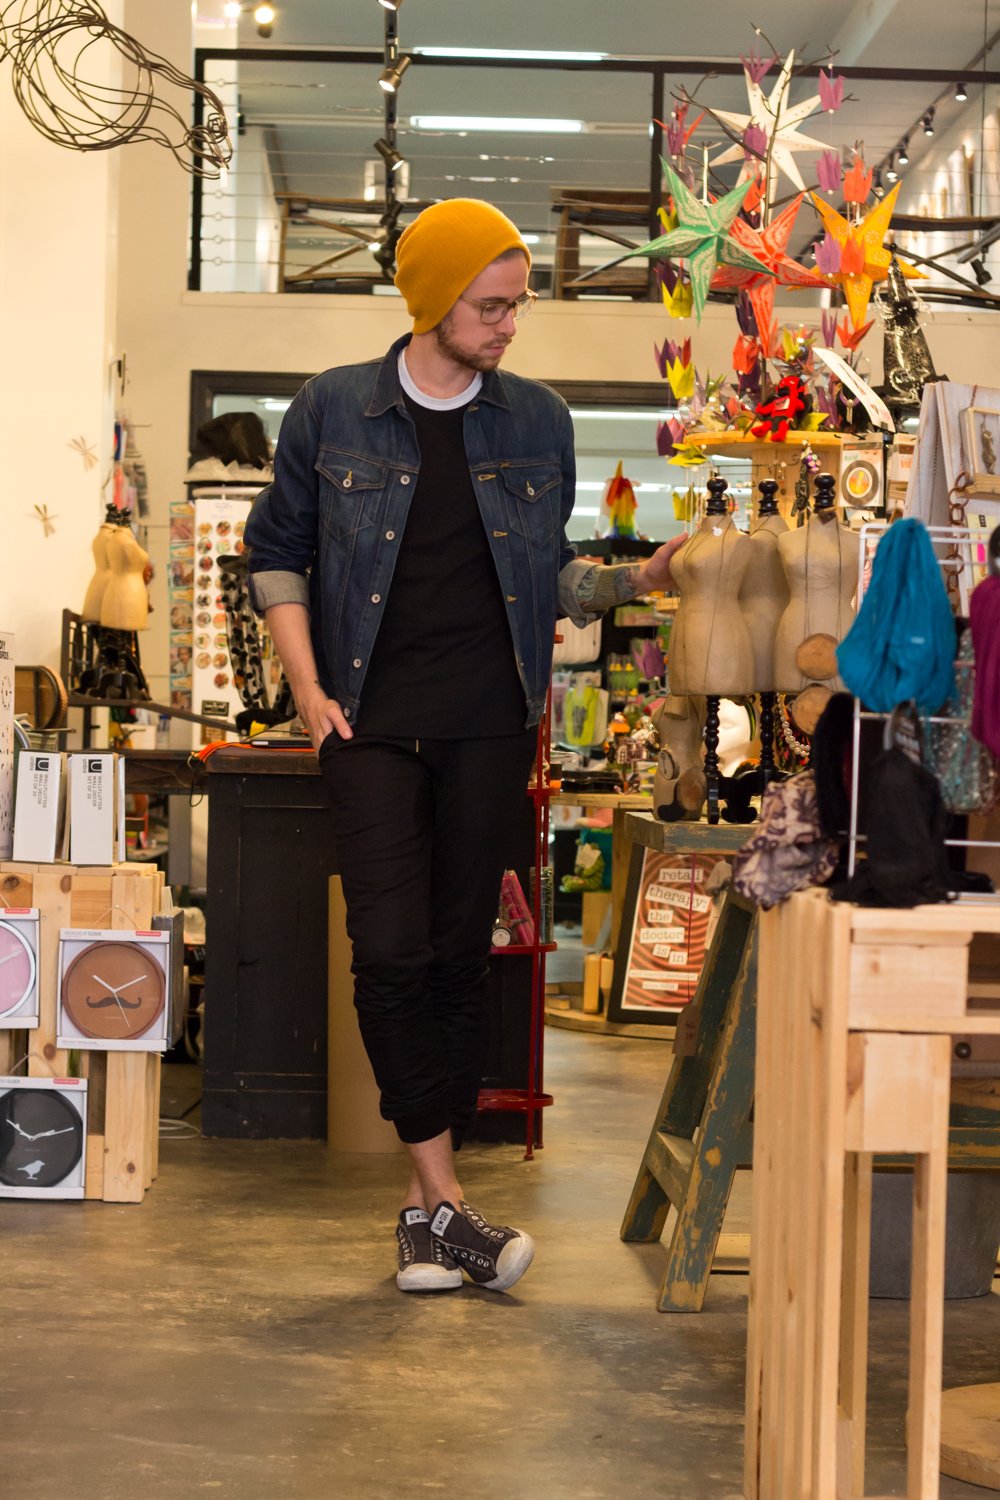 The Kentucky Gent, a Louisville, Kentucky blogger, in Forever 21 Beanie, Big Star Denim Jacket, American Apparel Baseball Tee, Zanerobe Mesh Joggers, and Converse Chuck Taylors at Regalo on South Fourth Street. 